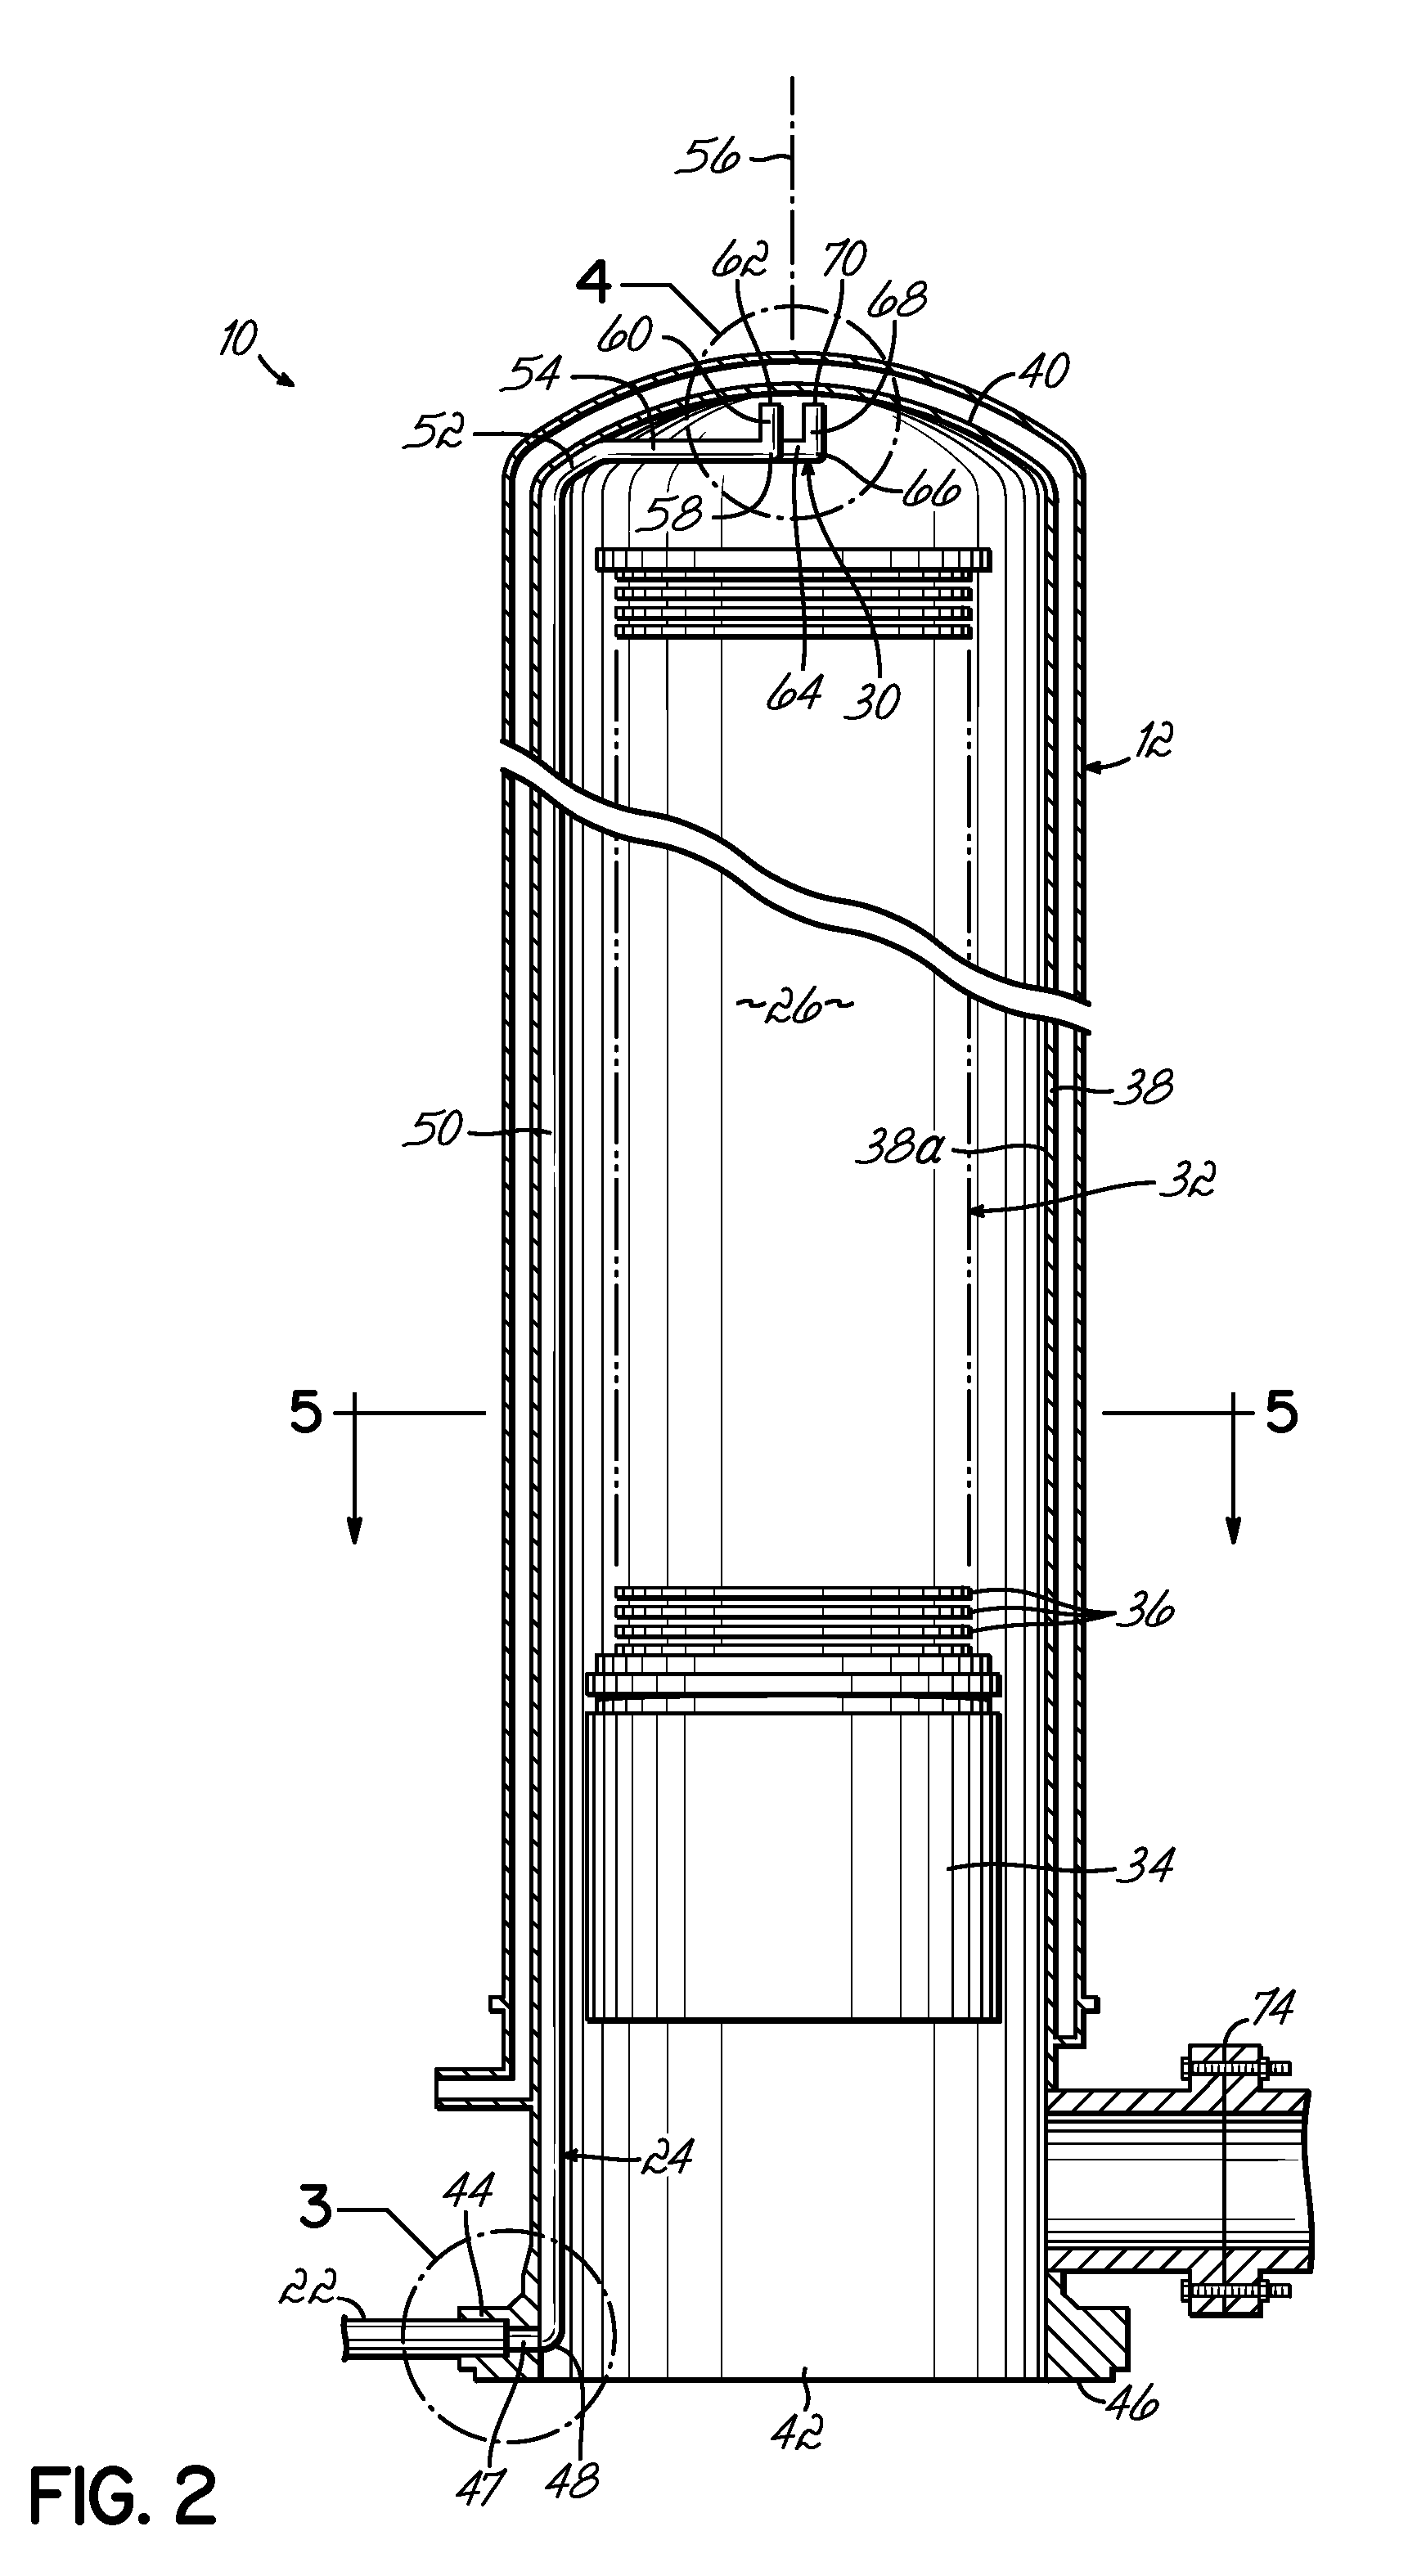 Thermal processing furnace, gas delivery system therefor, and methods for delivering a process gas thereto